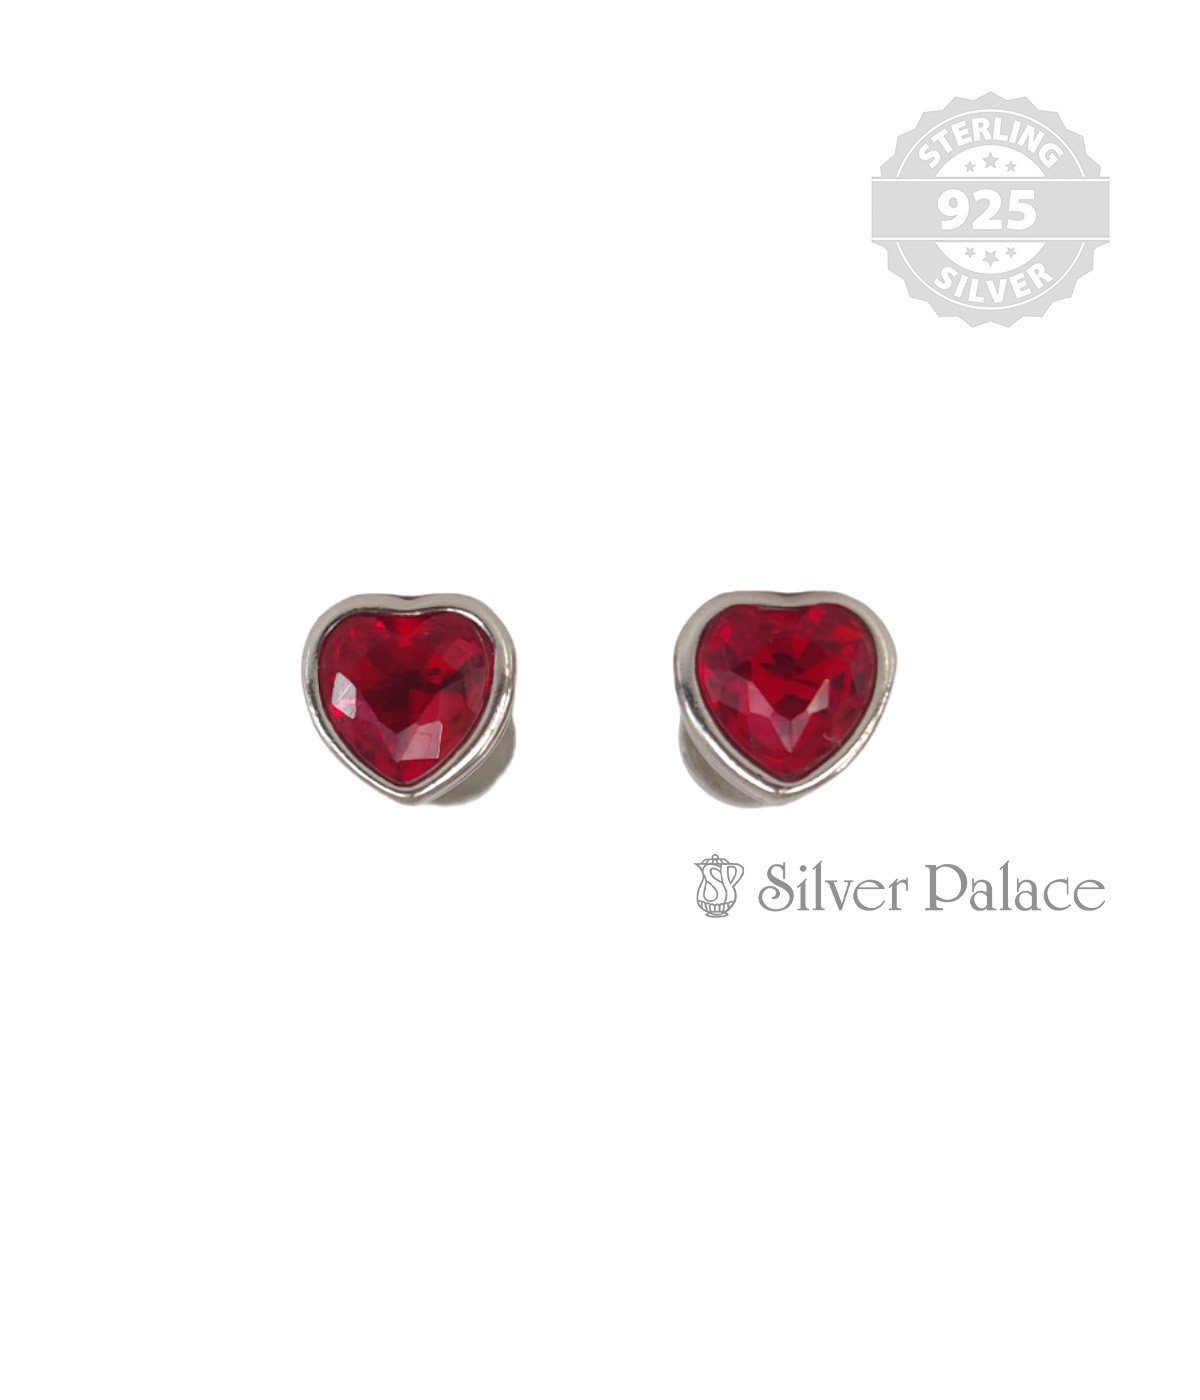 92.5 STERLING SILVER ROUND SHAPE RED STONE STUD